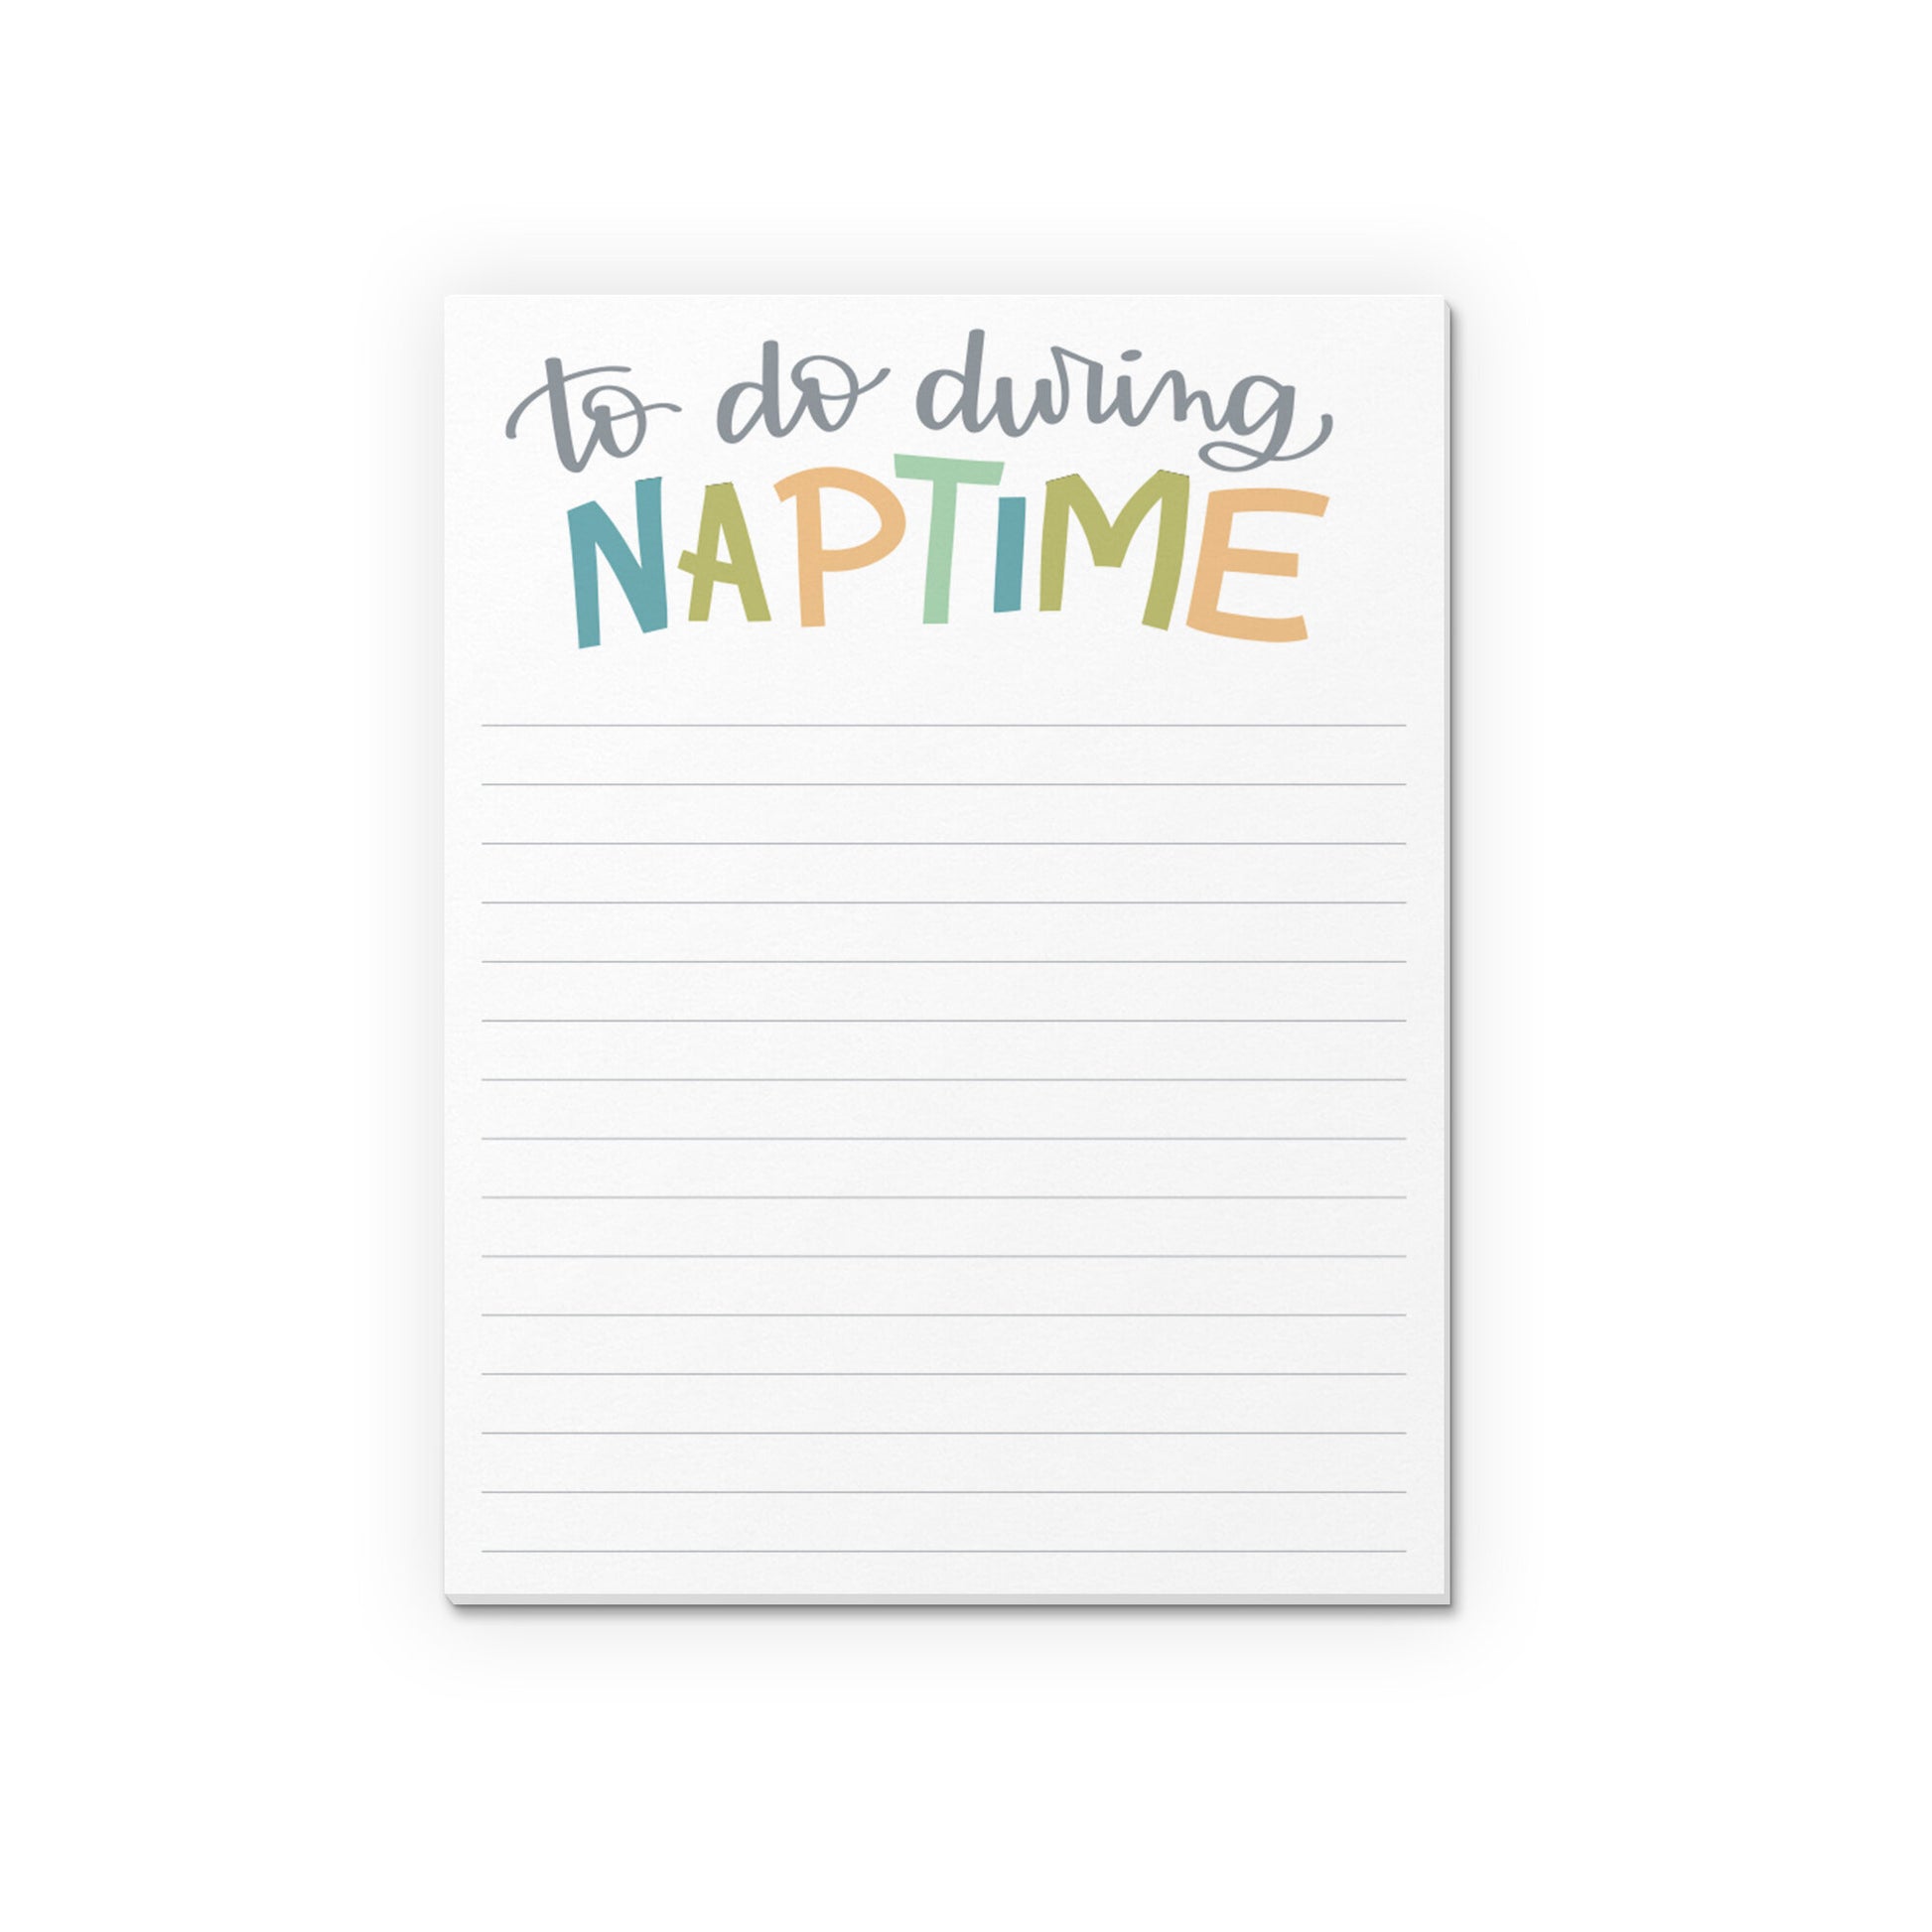 Mini notepad with the hand lettered text, to do during naptime.